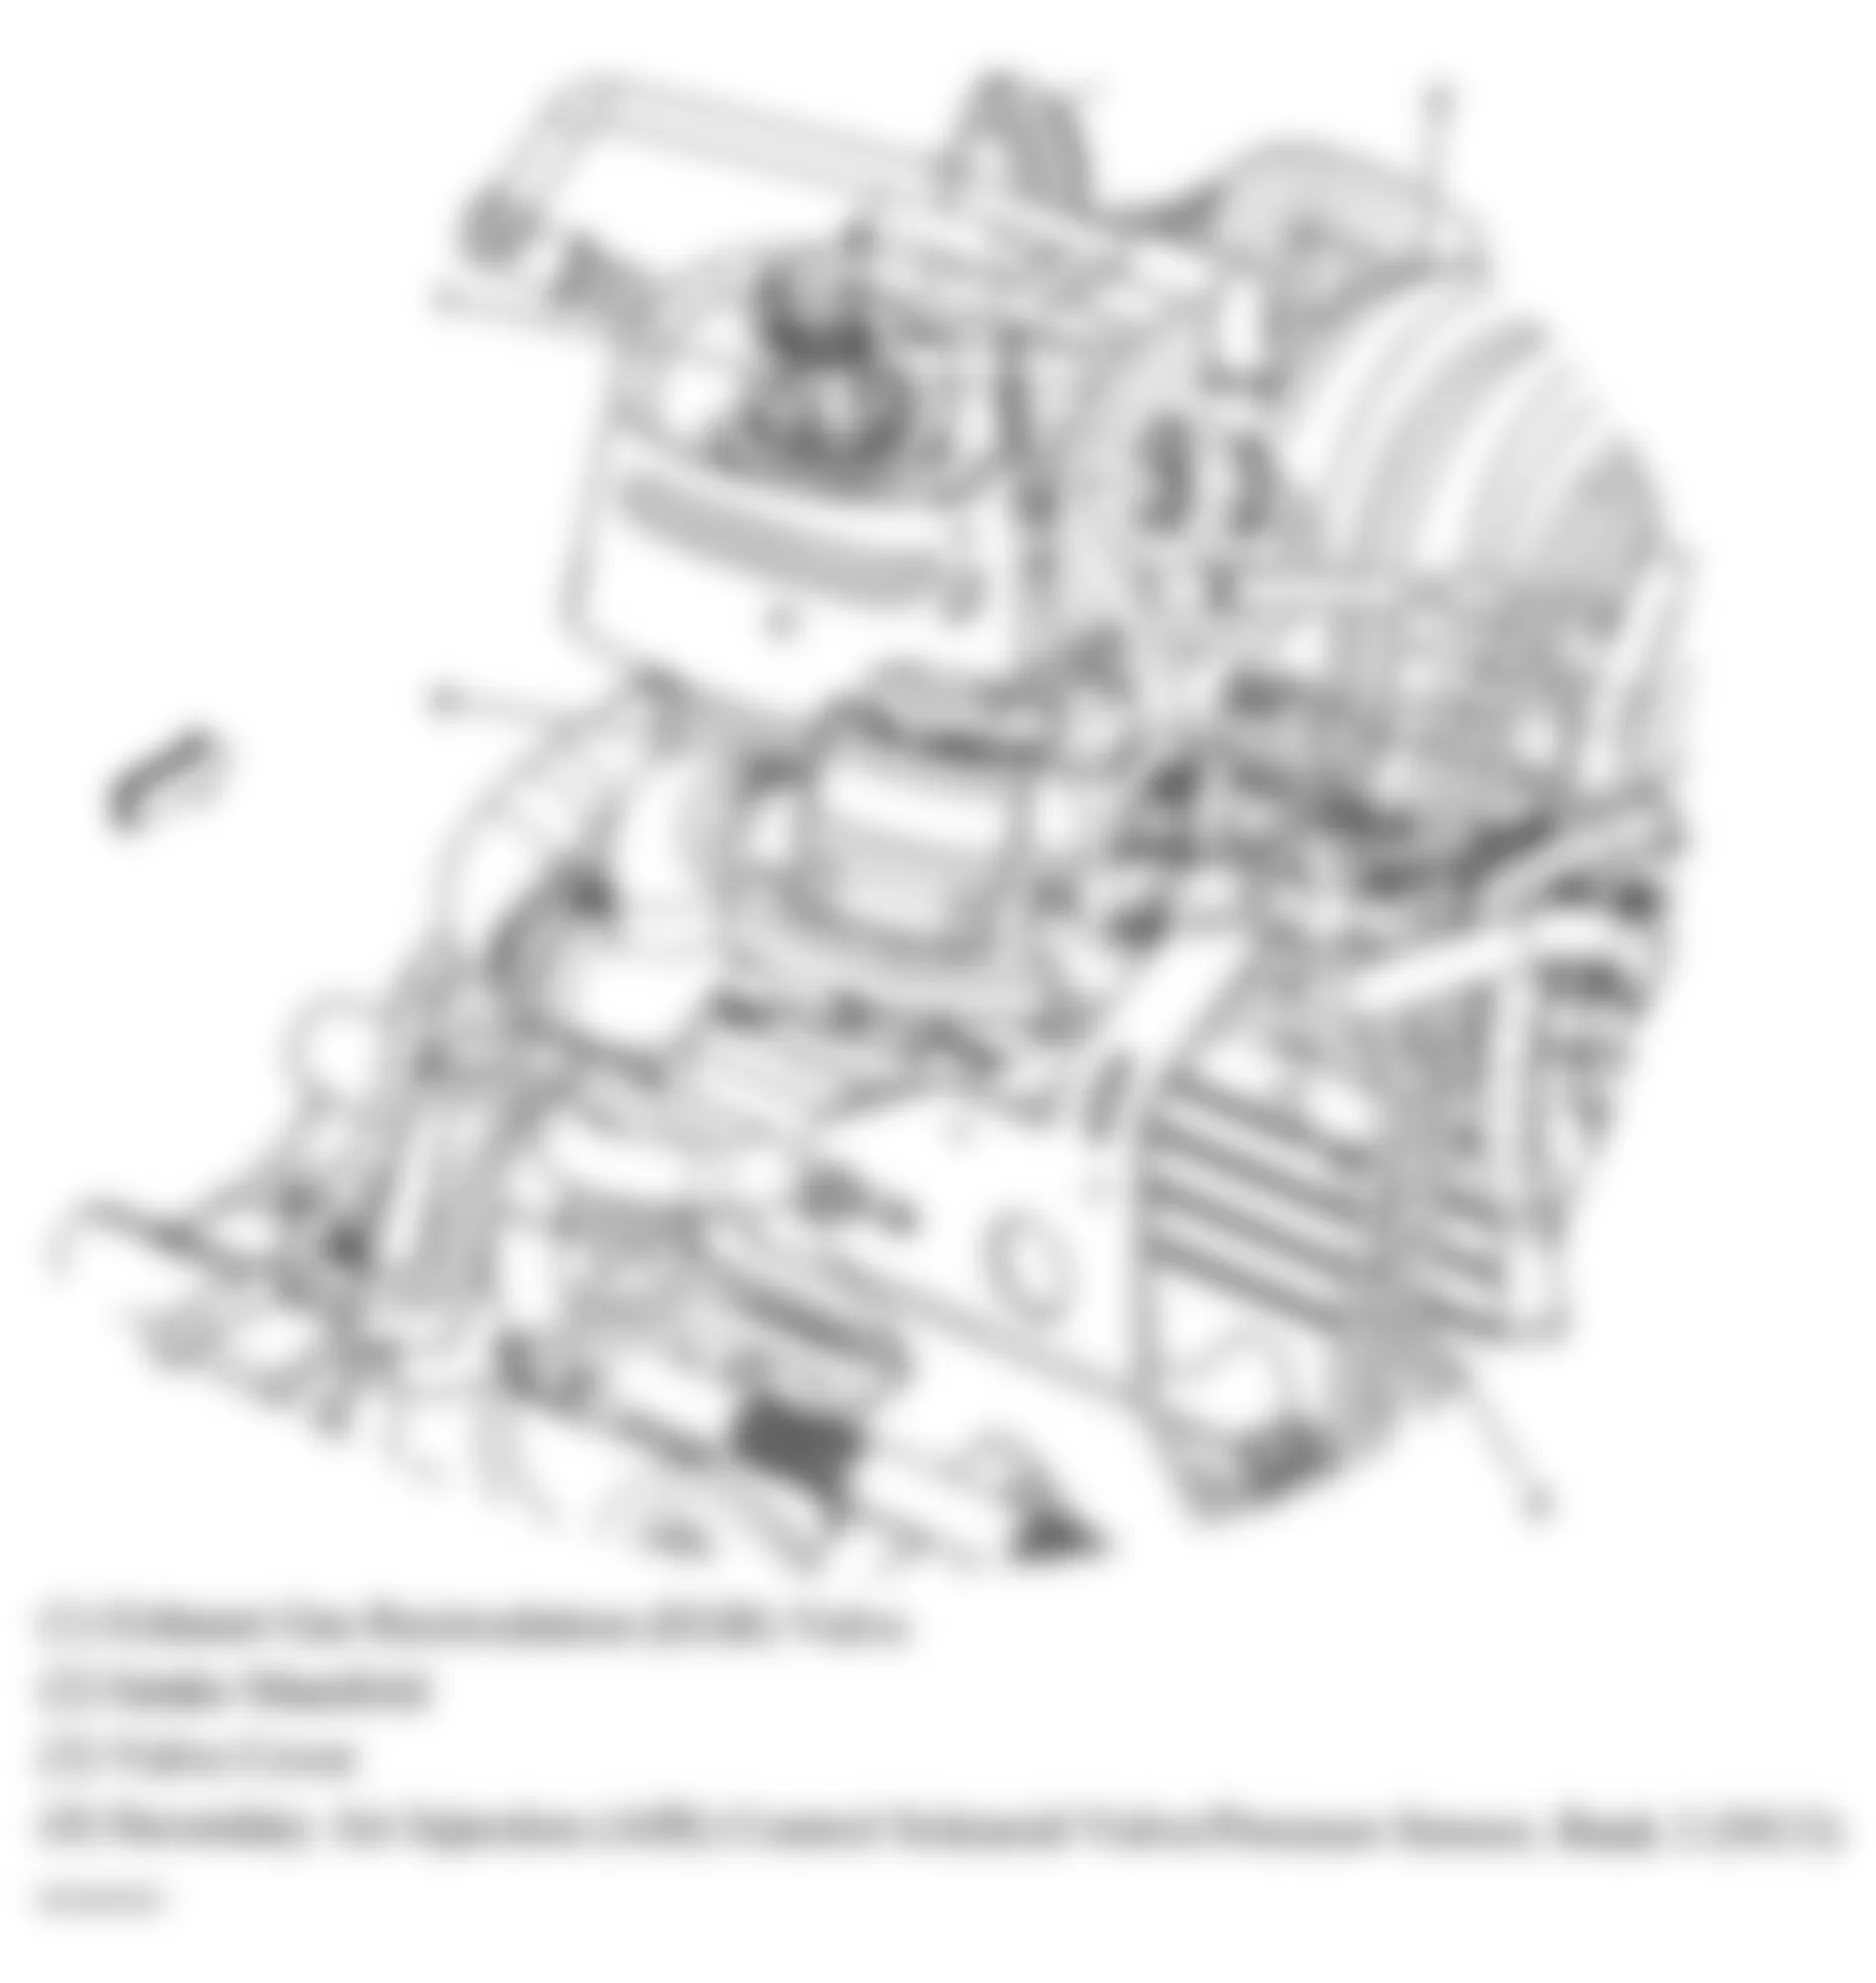 Buick LaCrosse CXL 2005 - Component Locations -  Upper Rear Of Engine (3.8L)